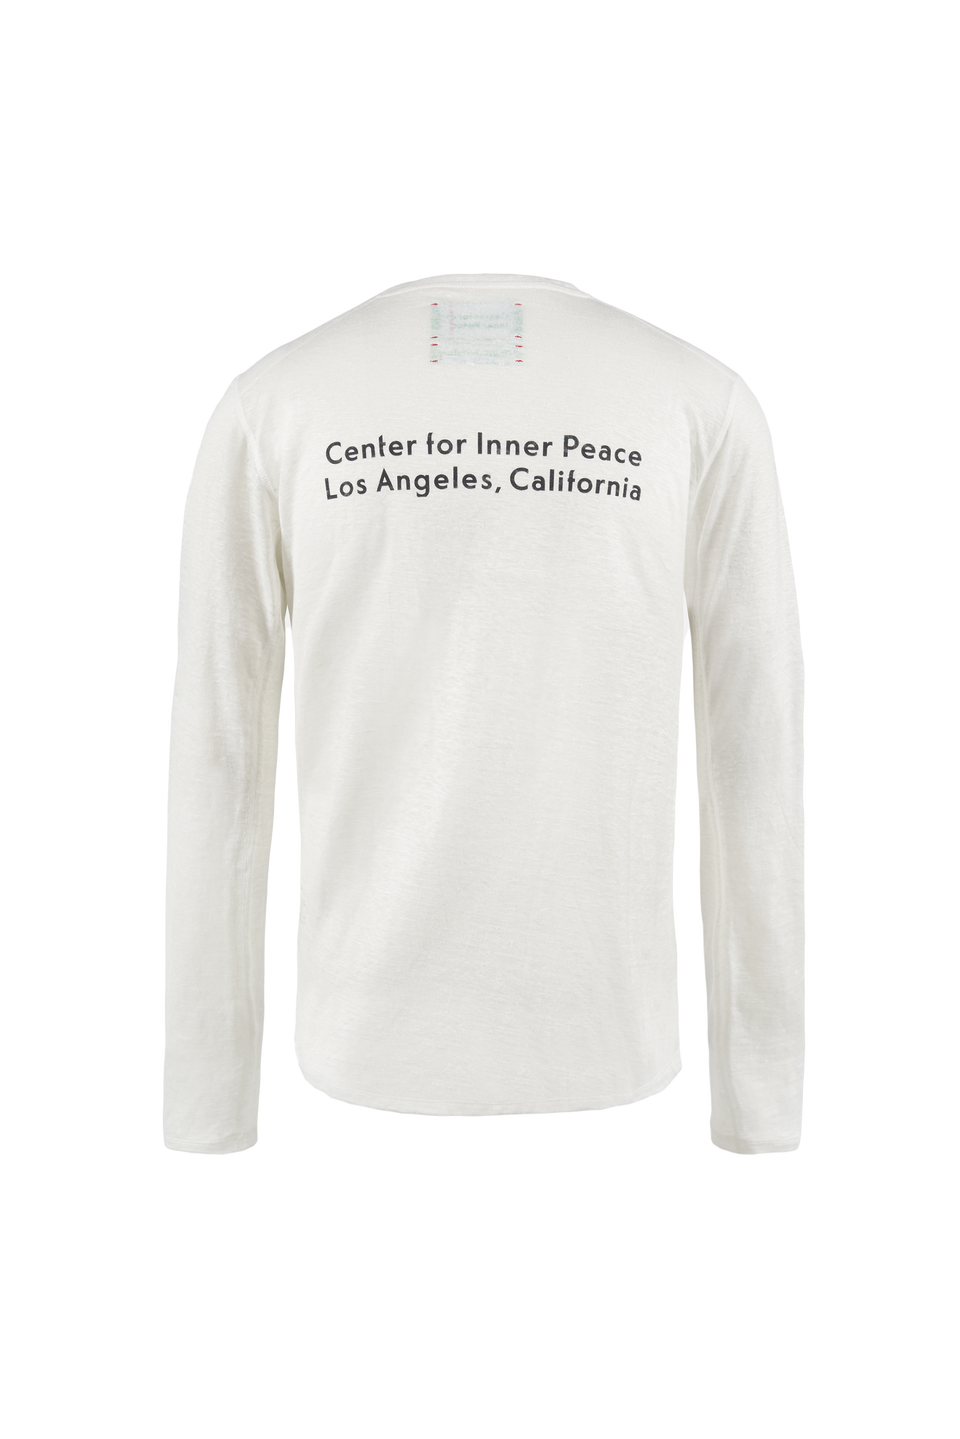 District Vision Los Angeles Trail Running FW23 Hemp Long Sleeve T-Shirt White Calculus Victoria BC Canada